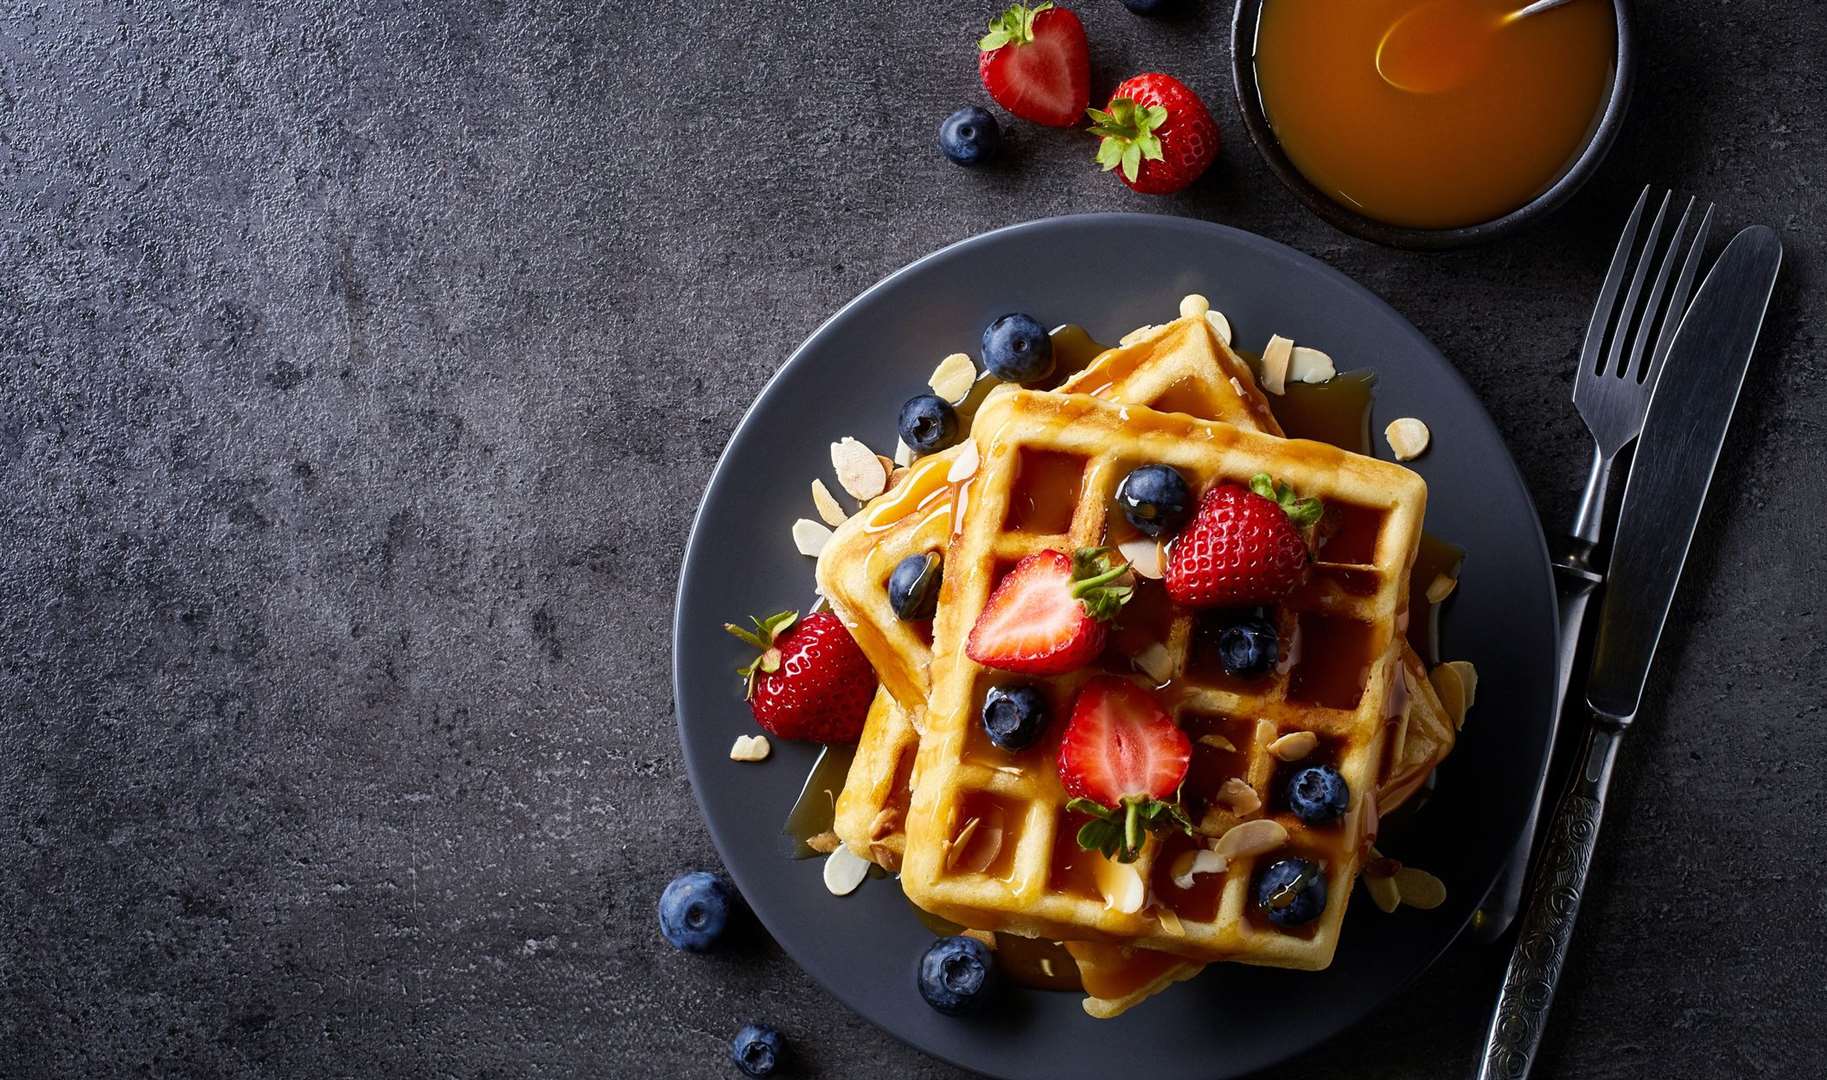 Fantastic waffles can be found on every continent, but they are particularly popular in northwestern Europe.